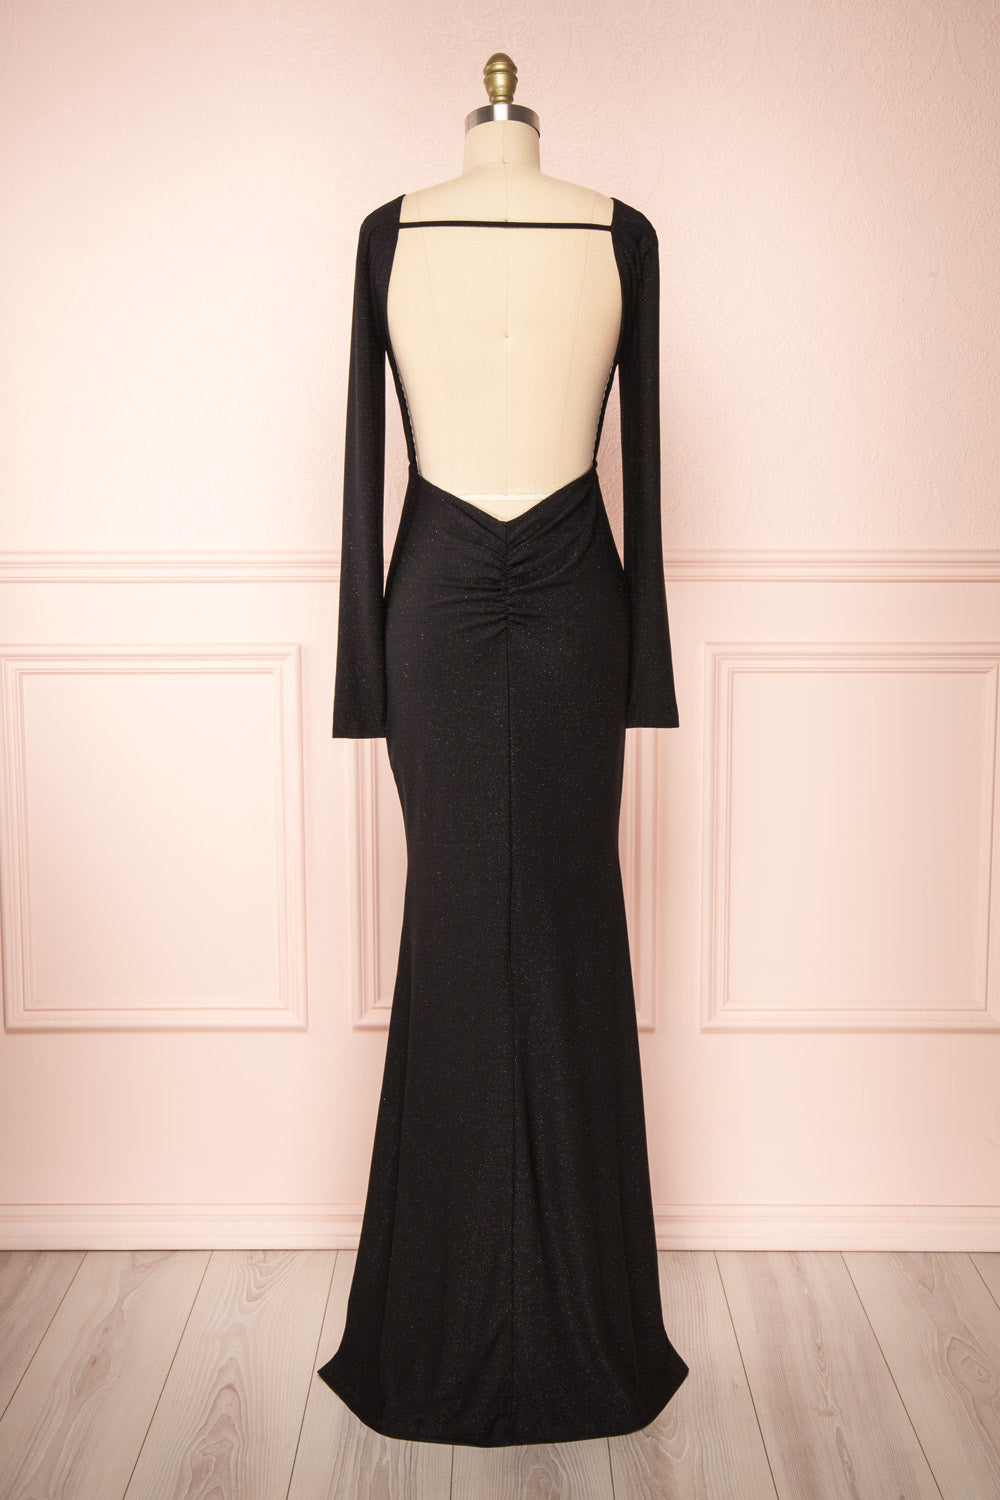 Nykha Backless Black Mermaid Dress | Boutique 1861 back view